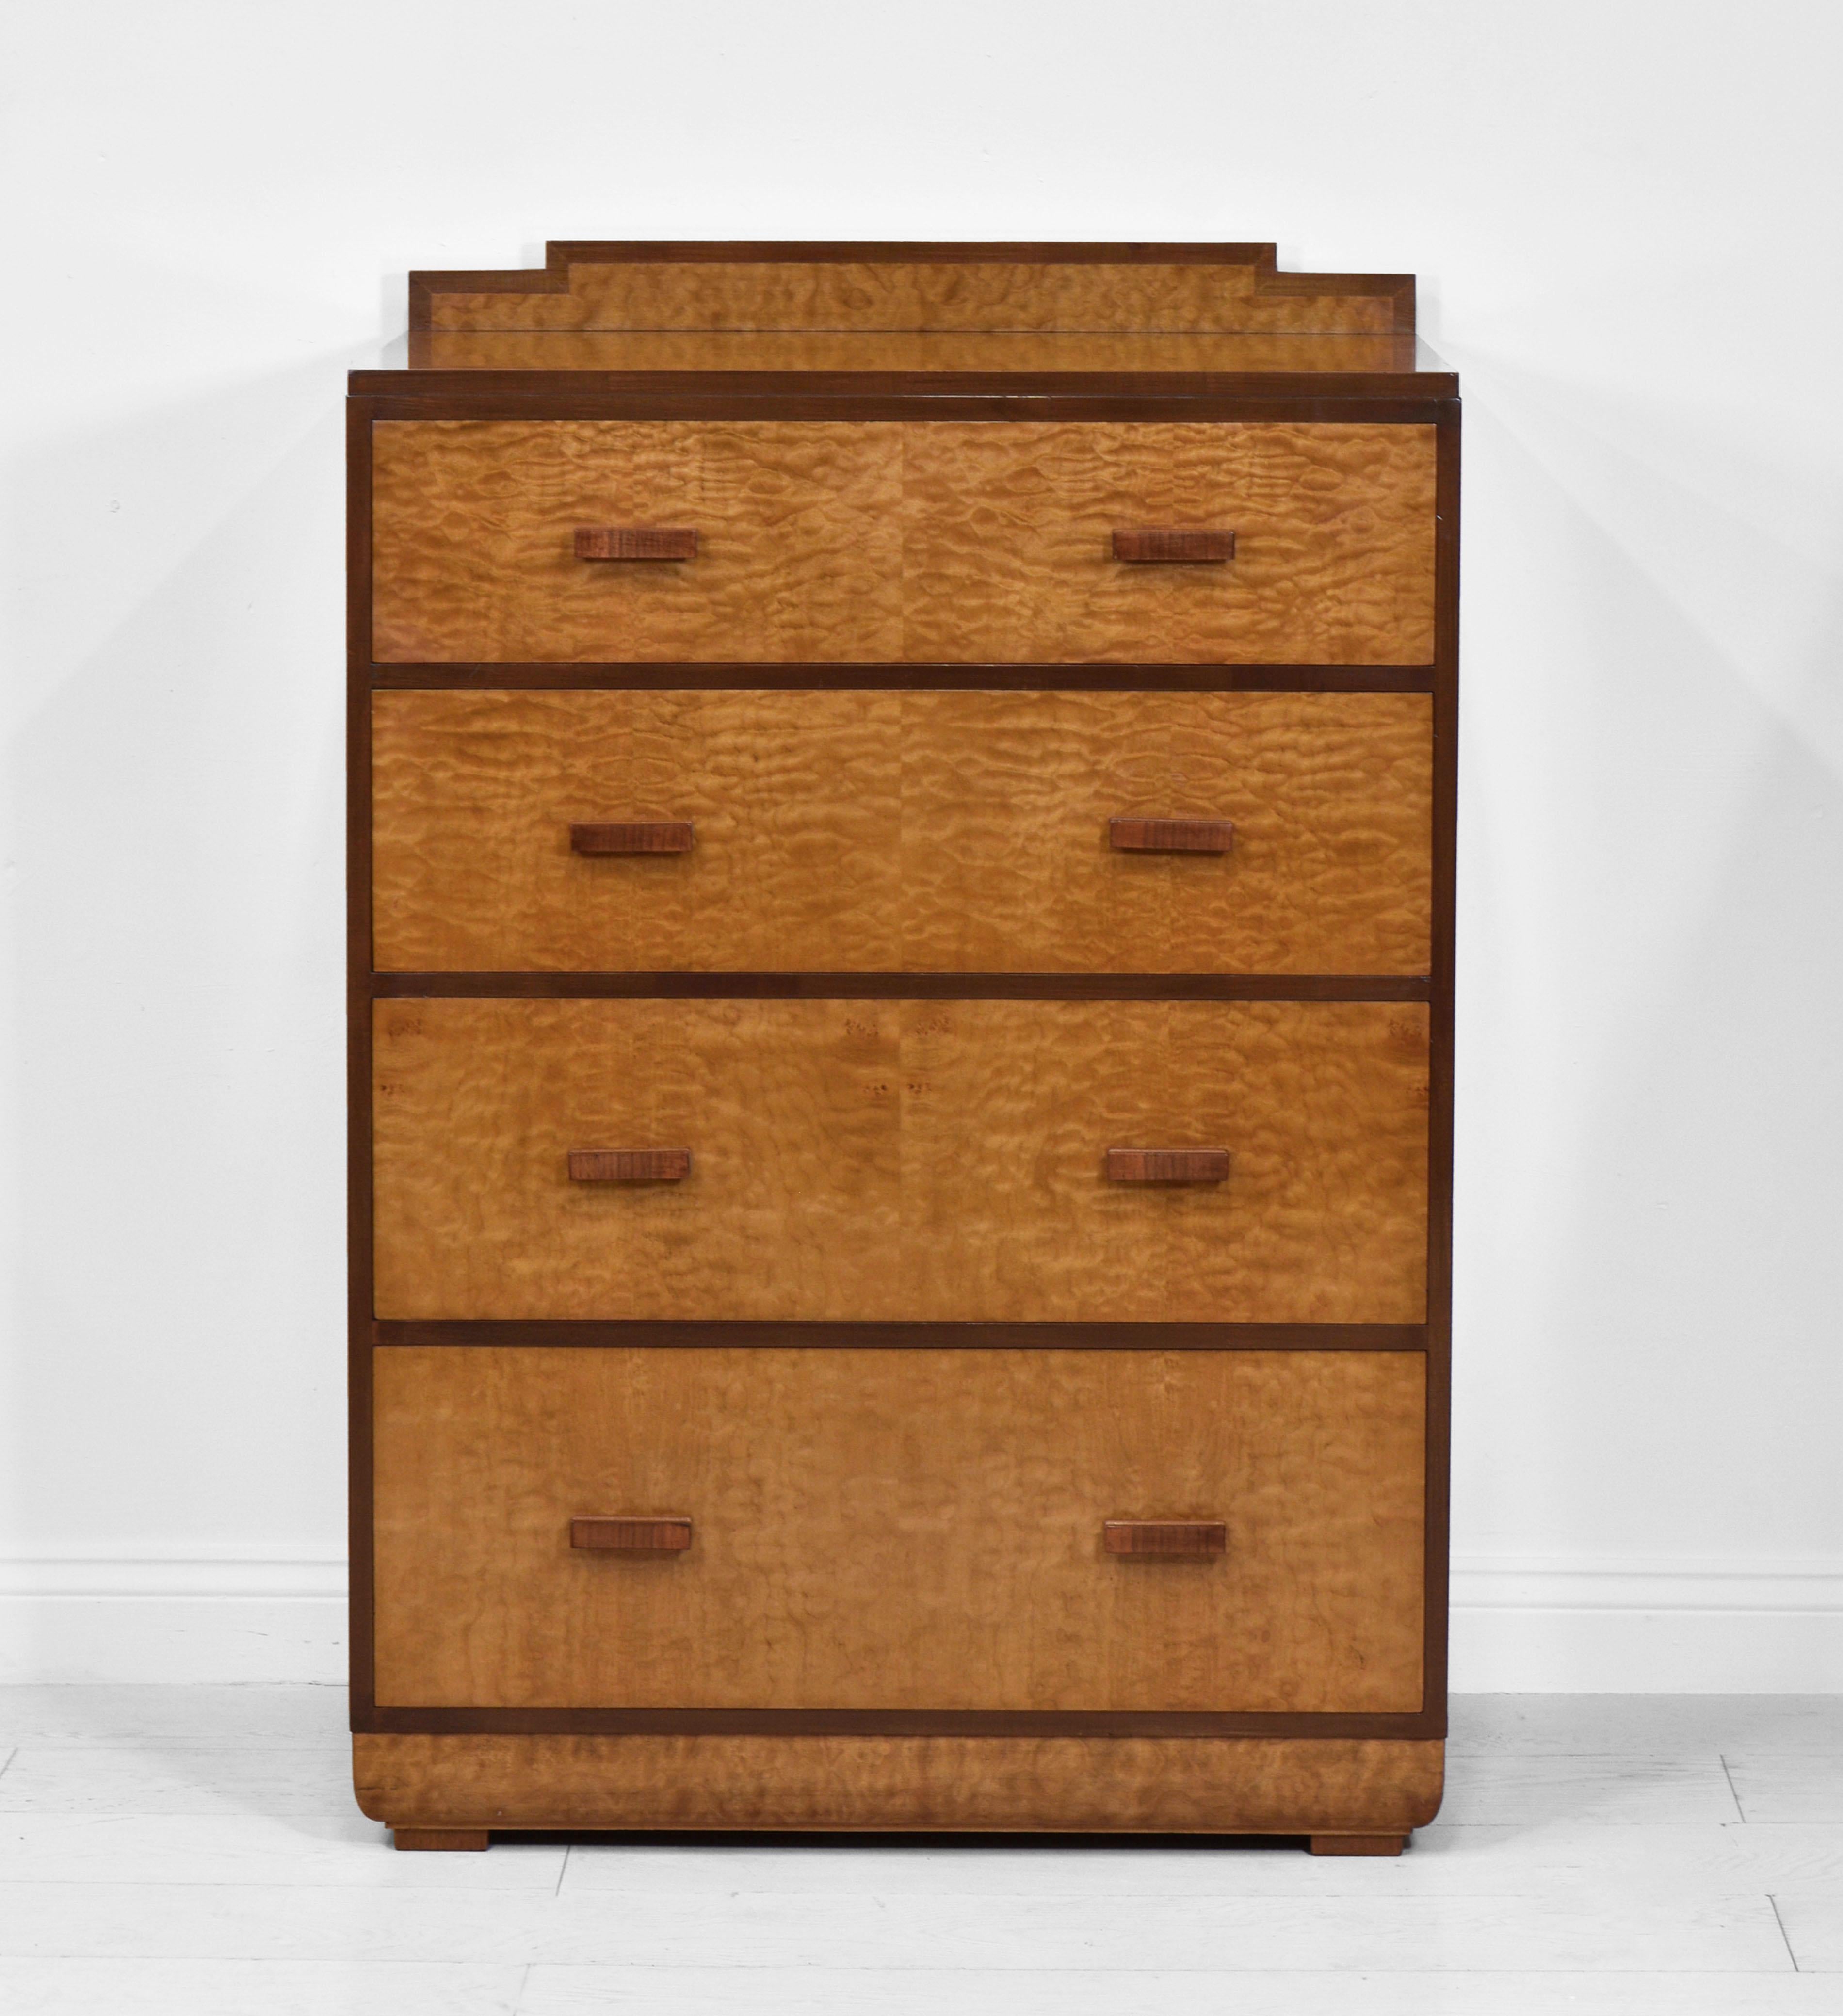 A superb Art Deco quilted maple and walnut chest of four graduating drawers, with step form back and inward swept plinth. Circa 1930.

The chest is veneered in quilted maple - a rare and beautiful veneer from the big leaf maple trees of the